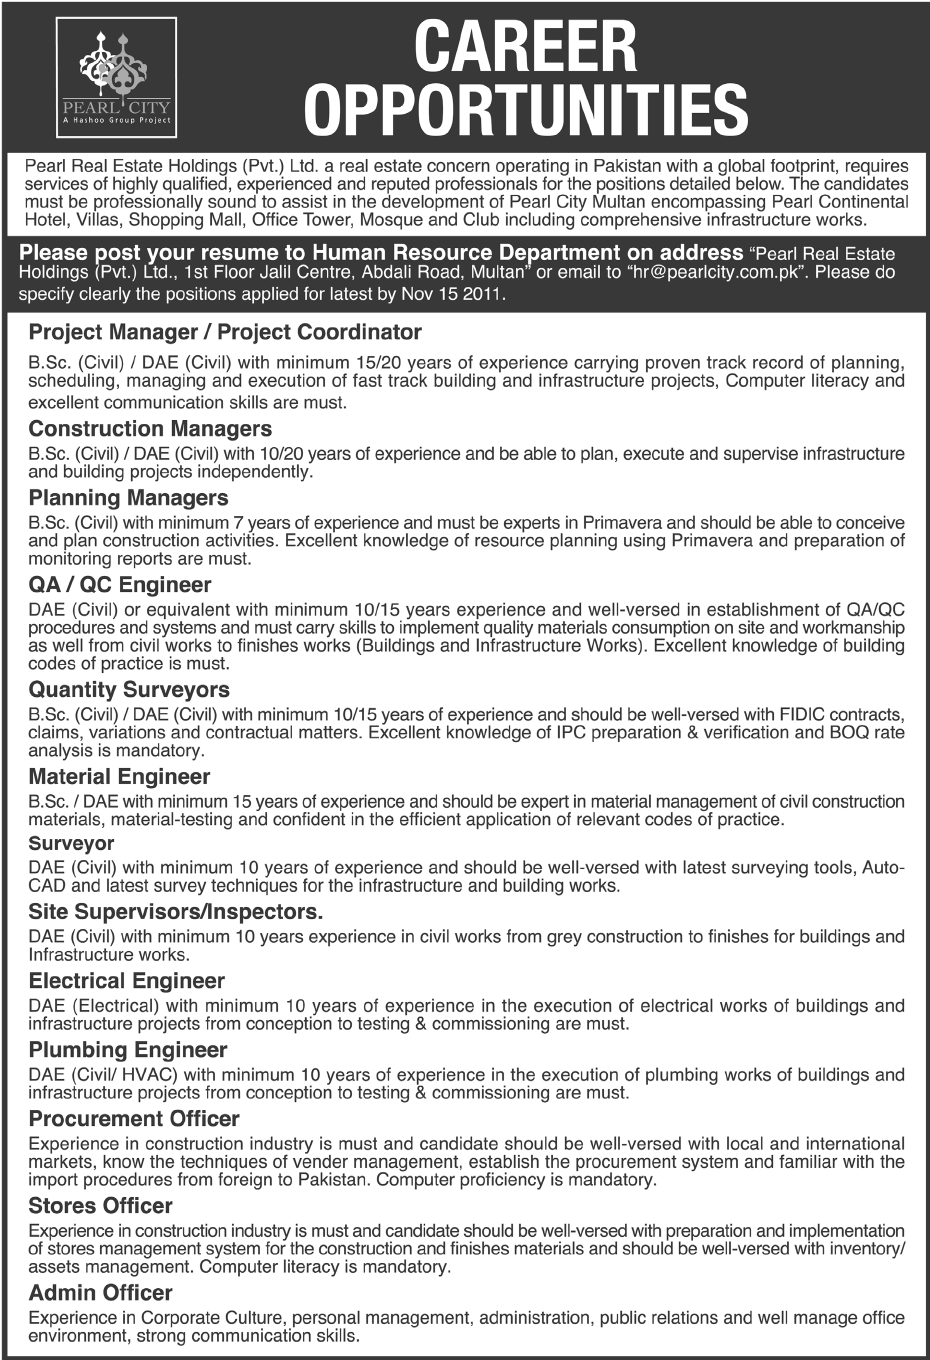 Pearl Real Estate Holding Pvt Ltd. Career Opportunities